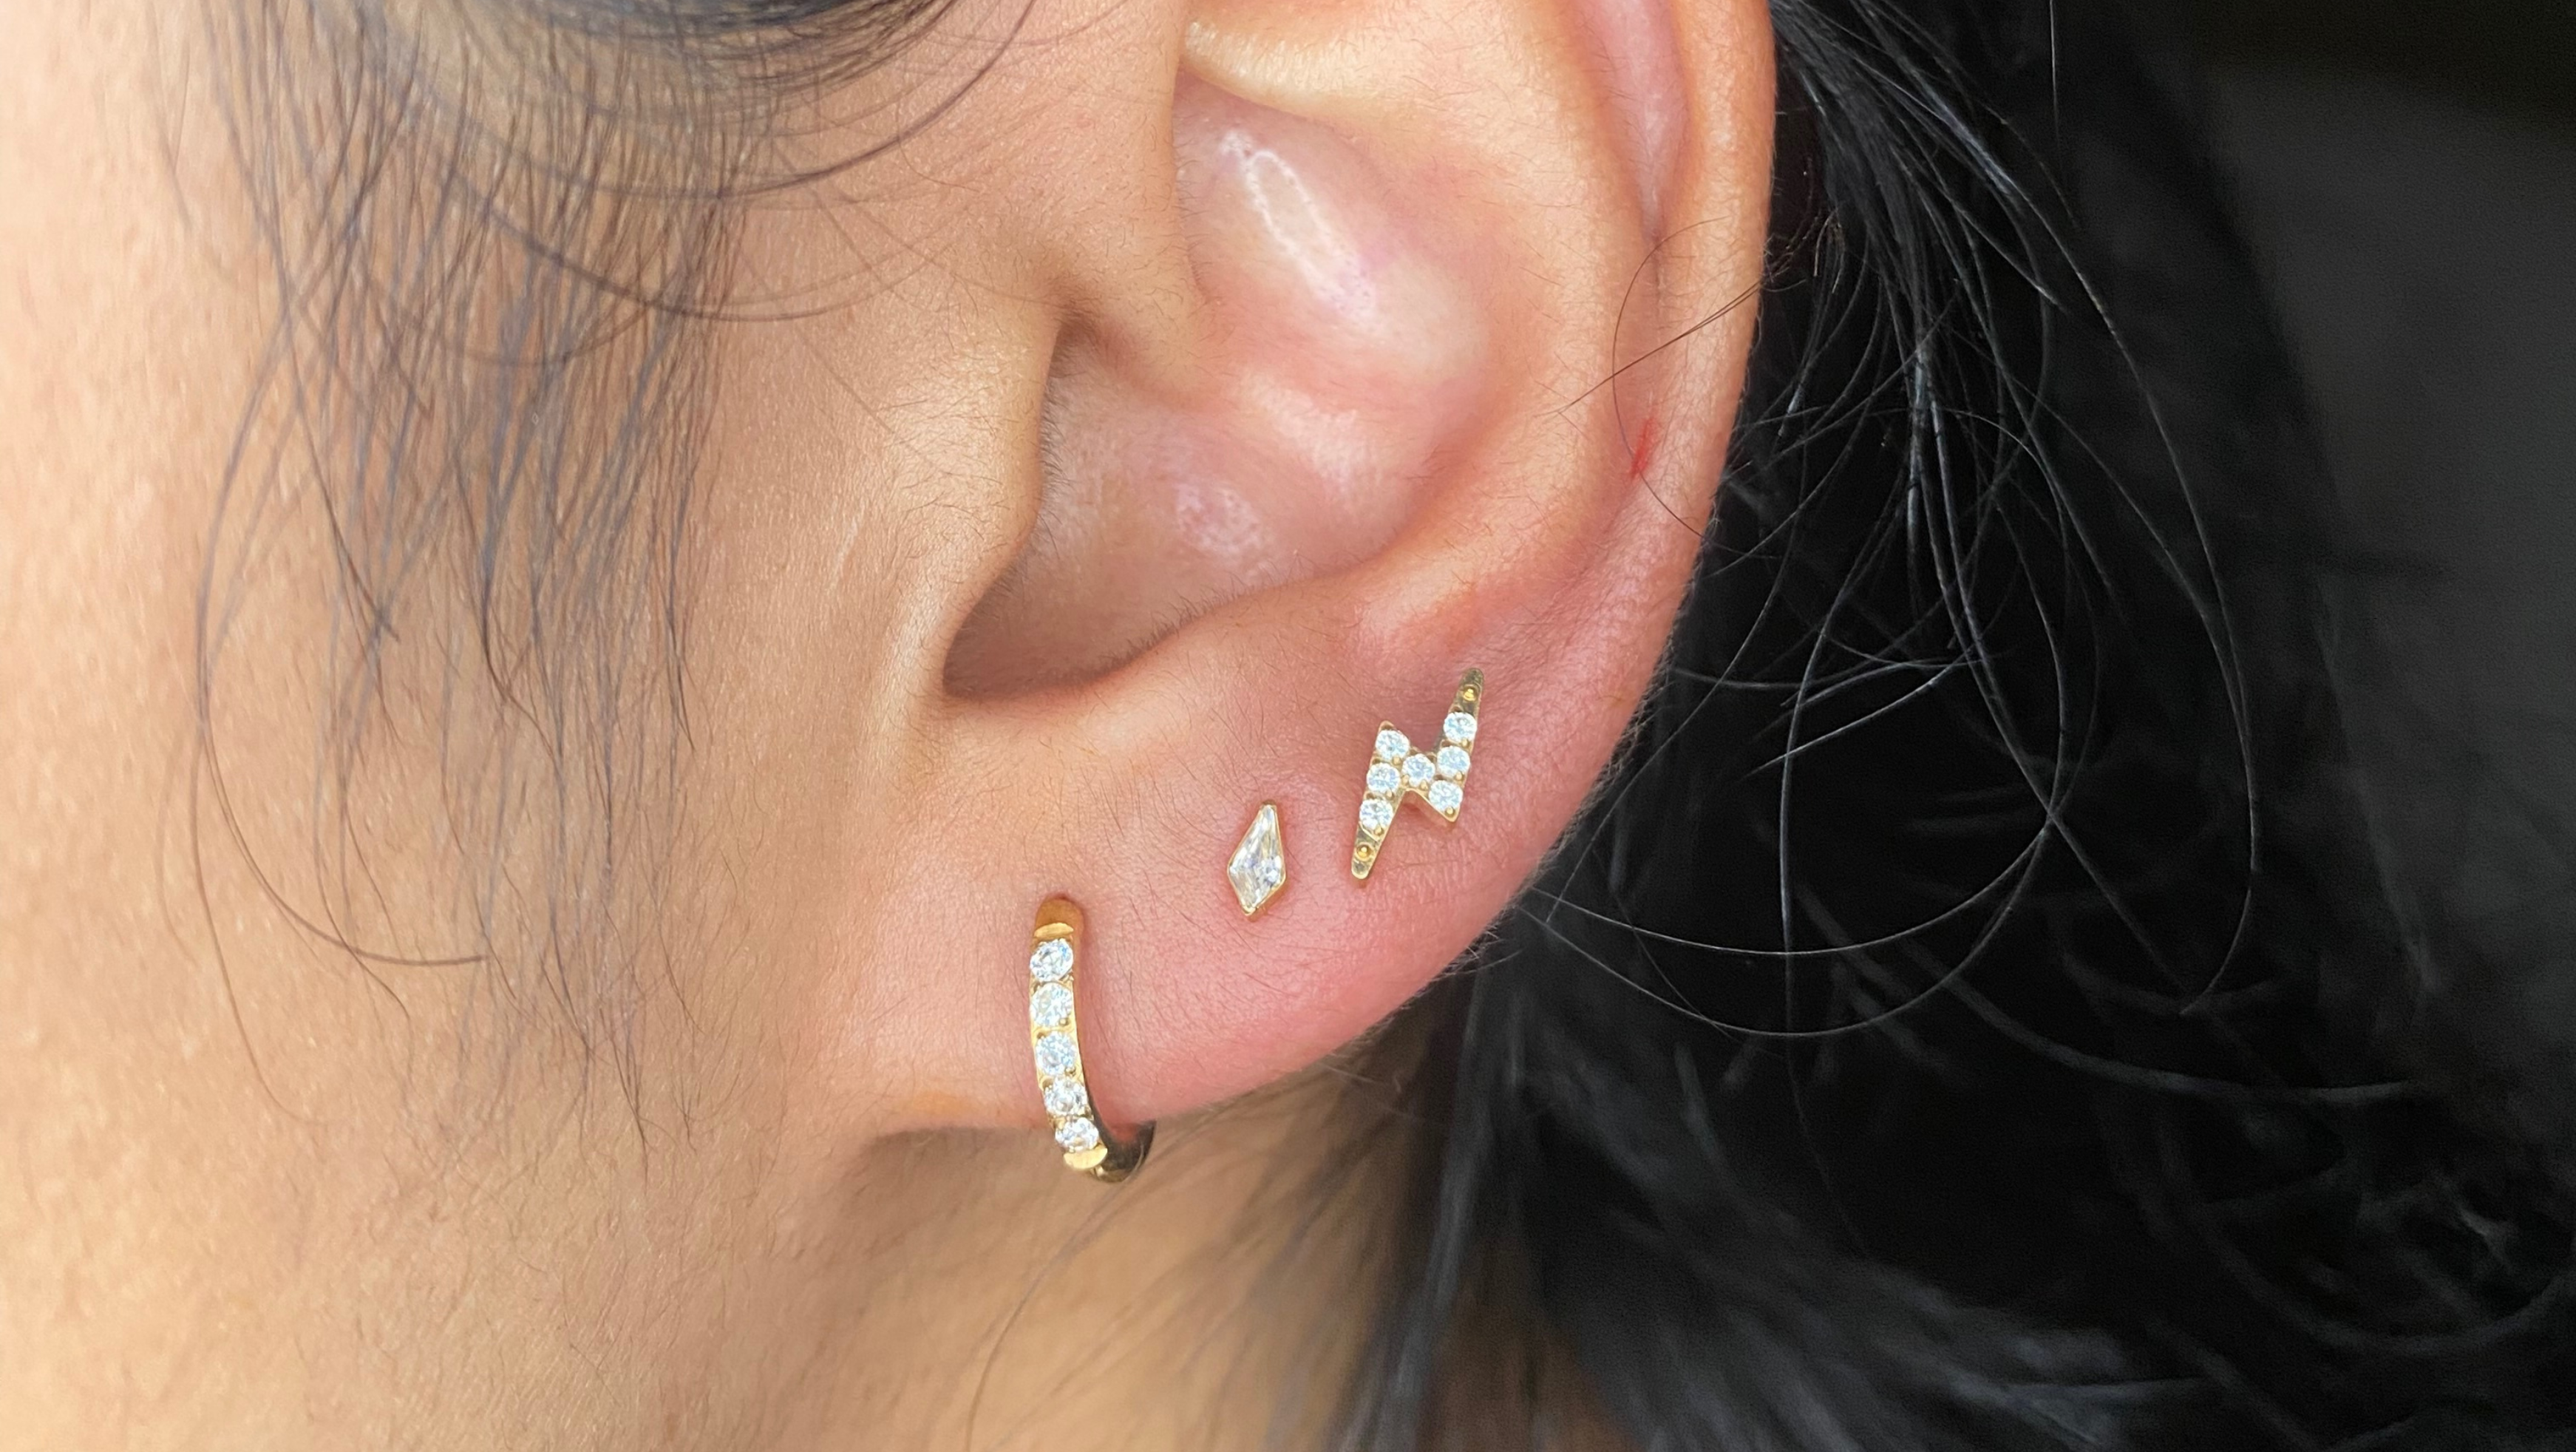 EVERYTHING YOU NEED TO KNOW ABOUT LOBE PIERCING